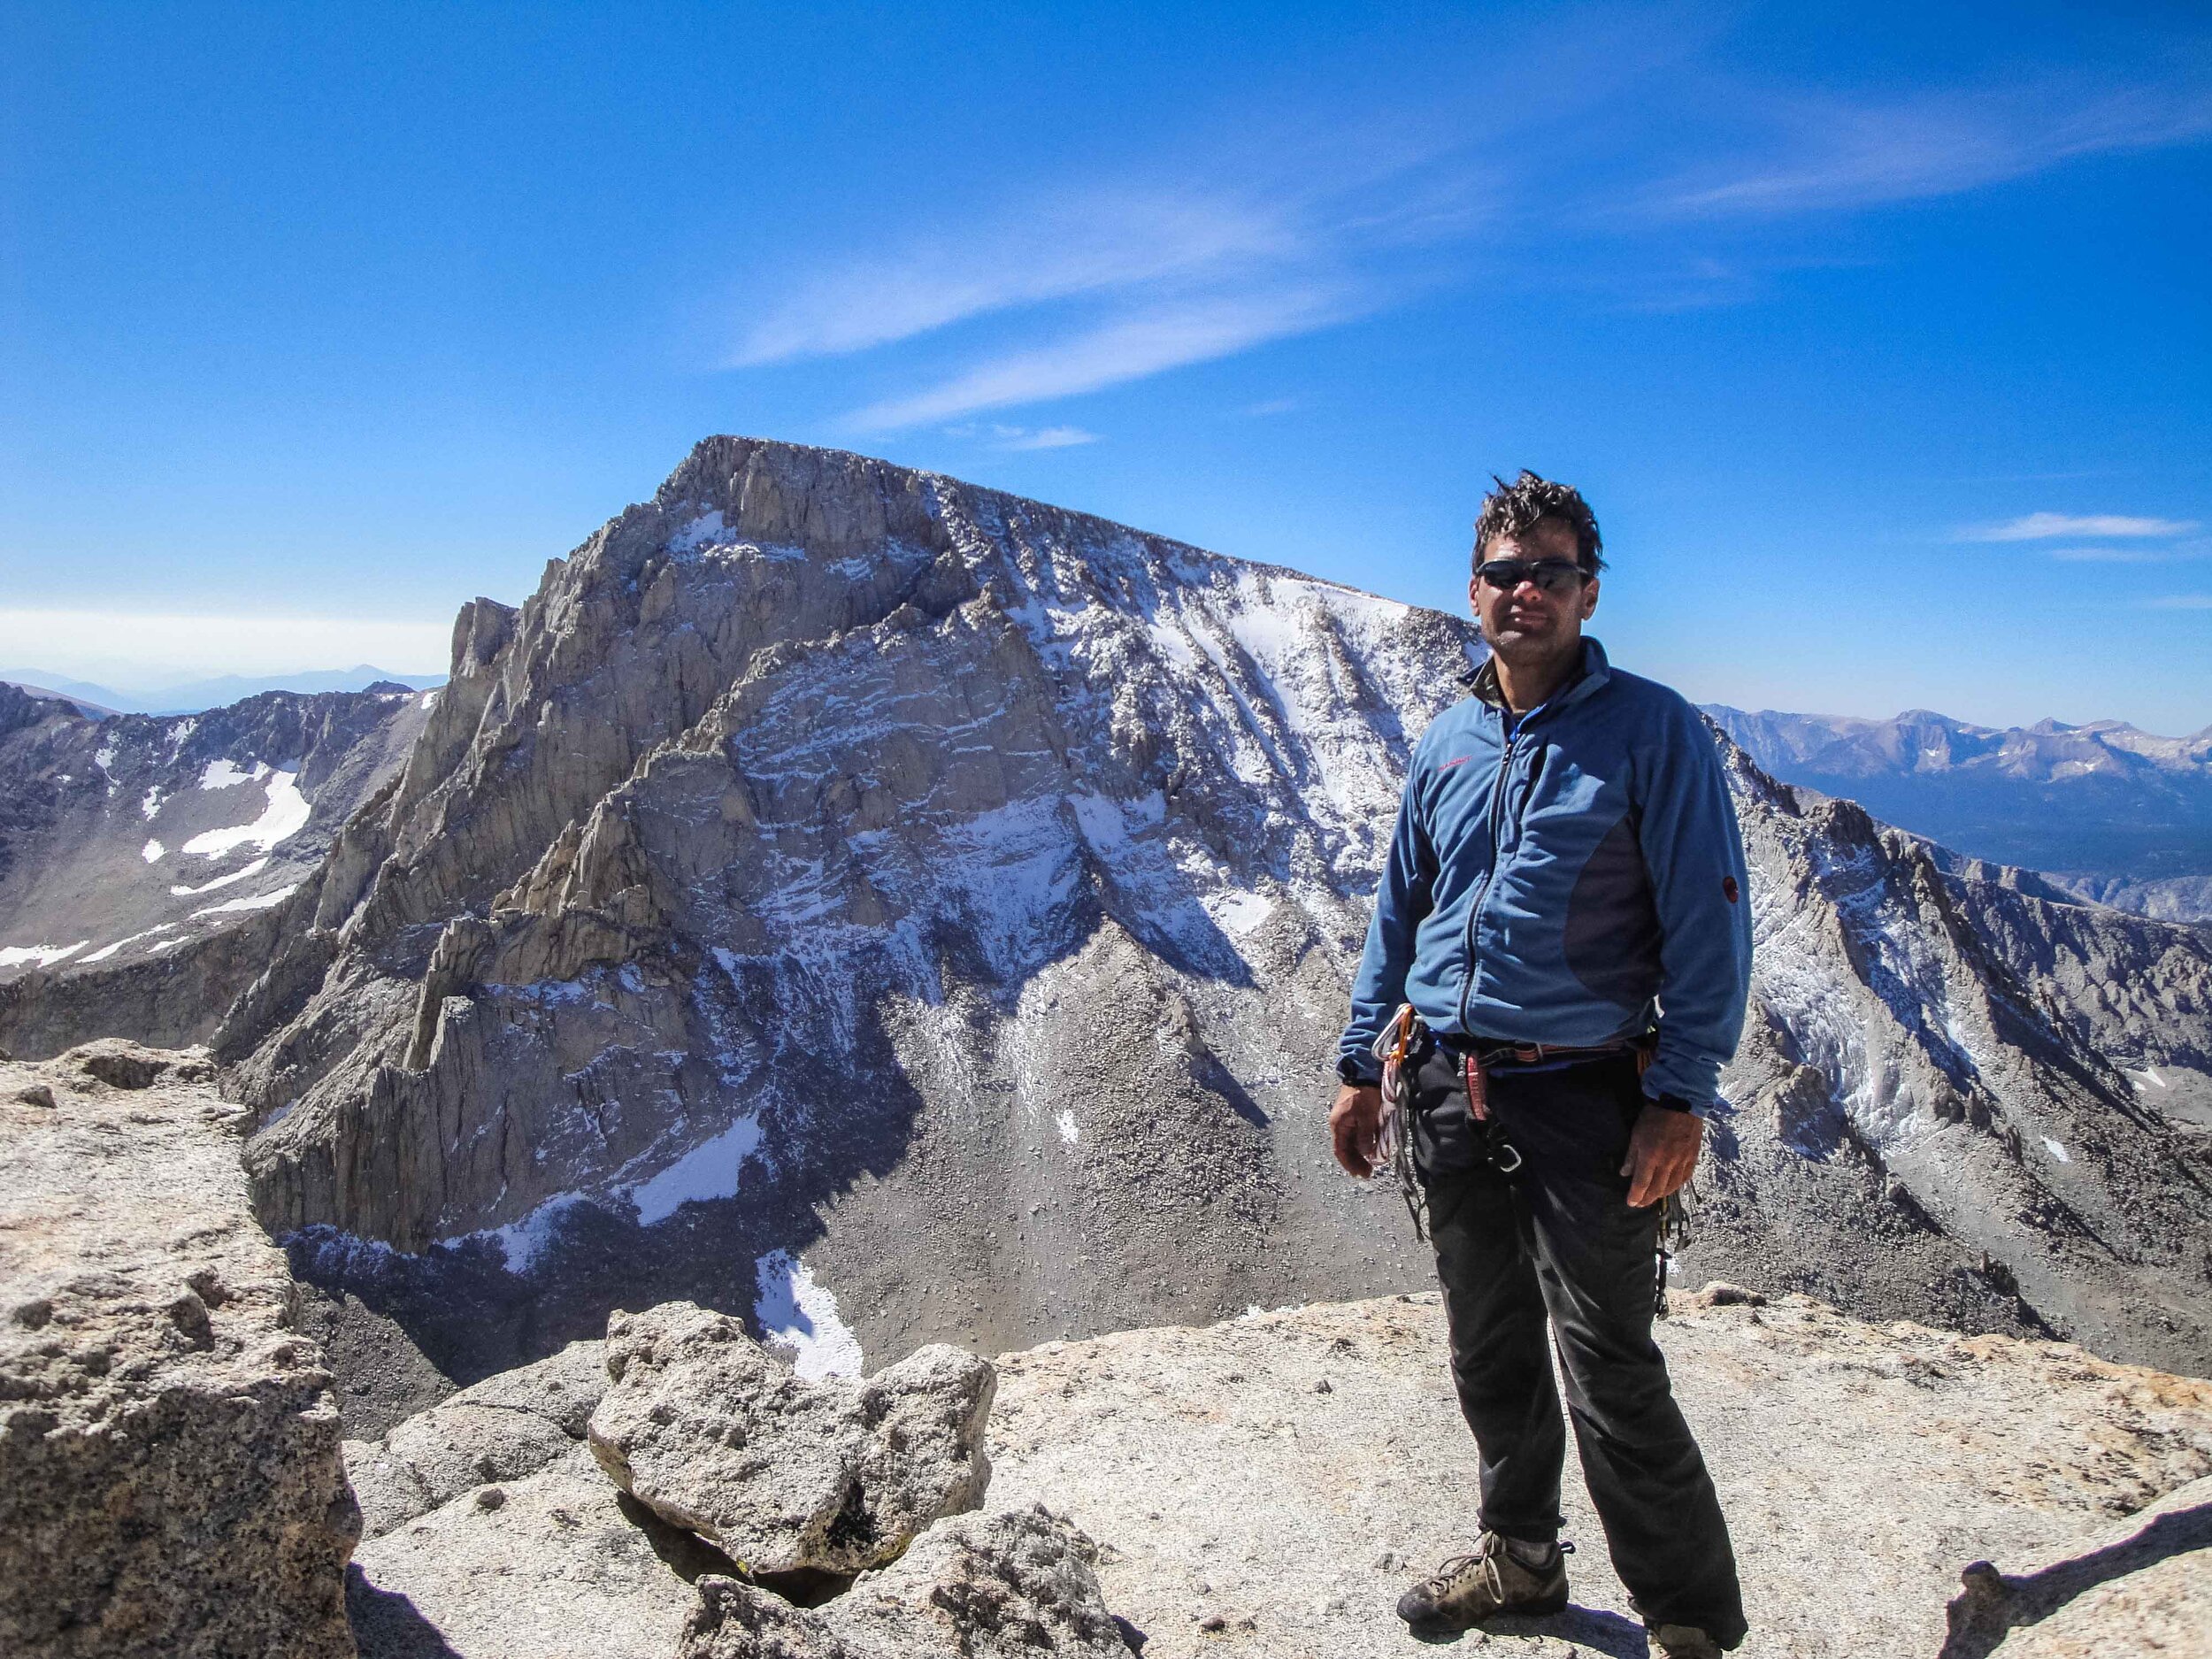 View of Mount Whitney from the summit of Mount Russell